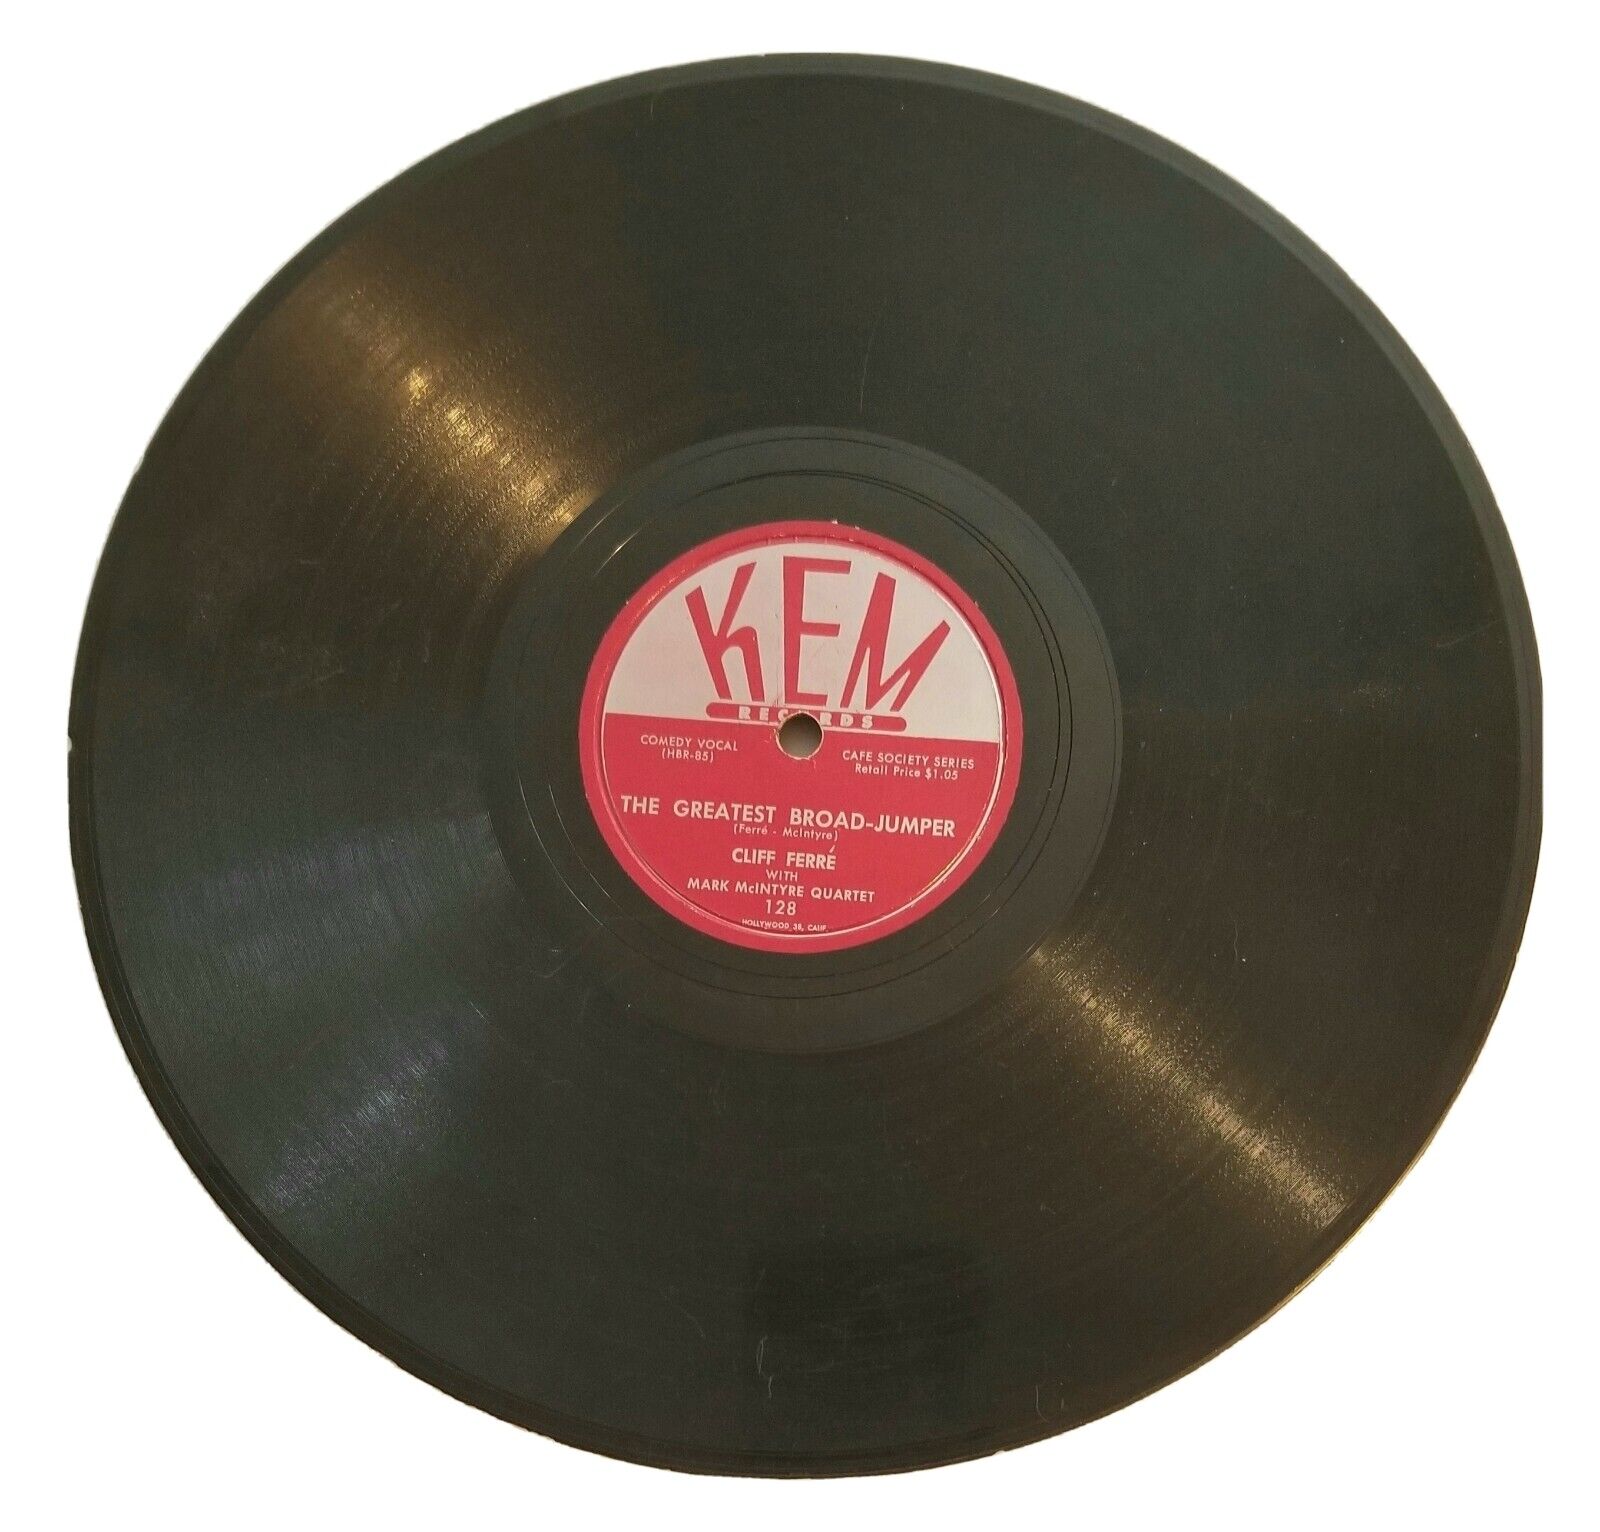 The Greatest Broad-Jumper 78 RPM by Cliff Ferre.  KEM Records 128.  Comedy Vocal